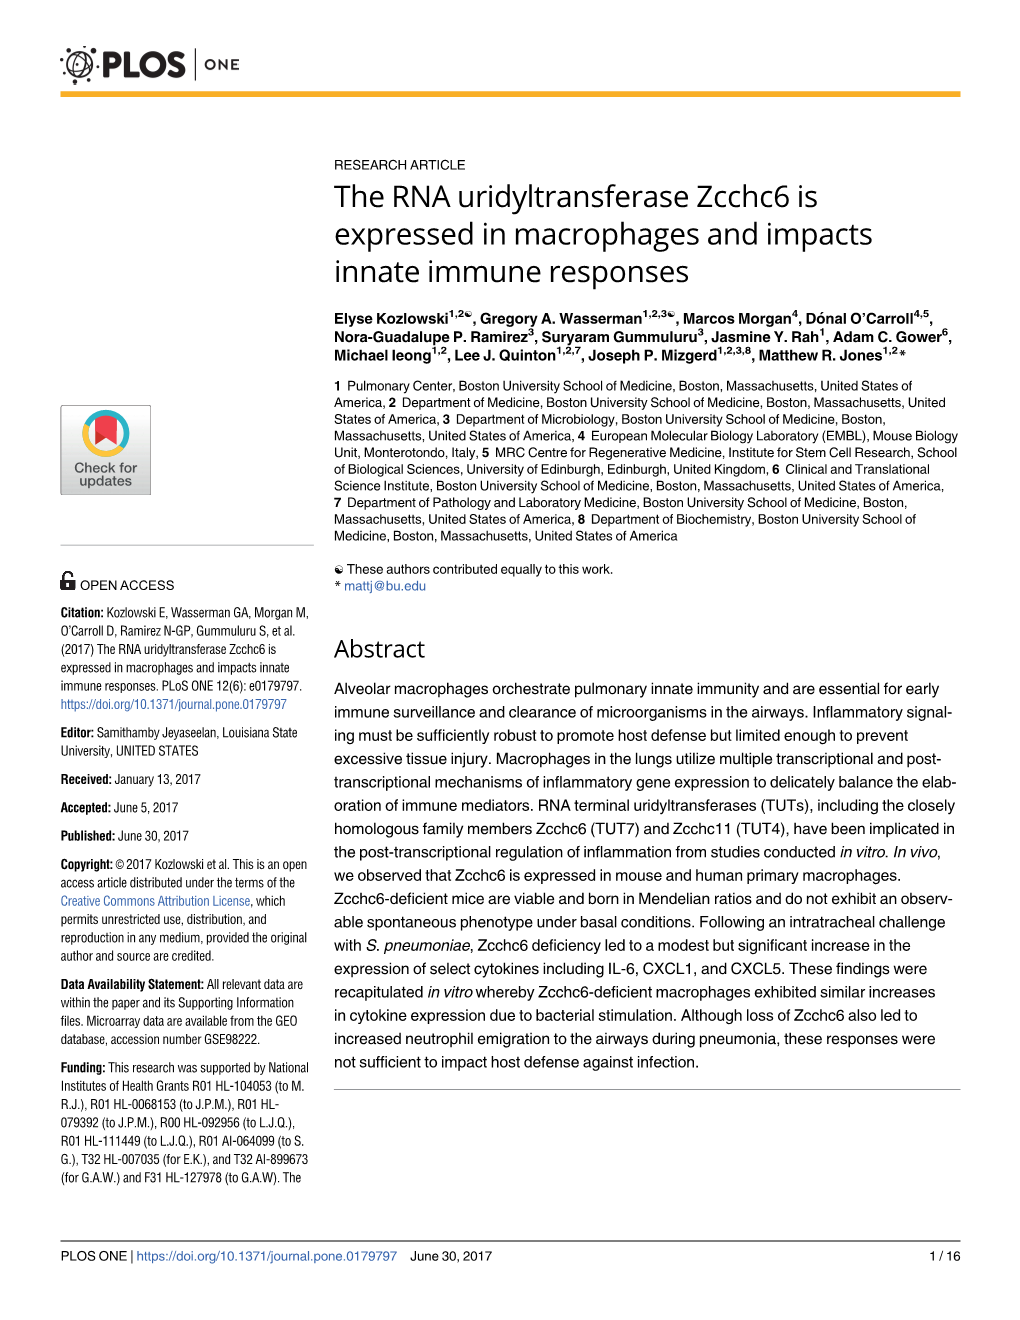 The RNA Uridyltransferase Zcchc6 Is Expressed in Macrophages and Impacts Innate Immune Responses